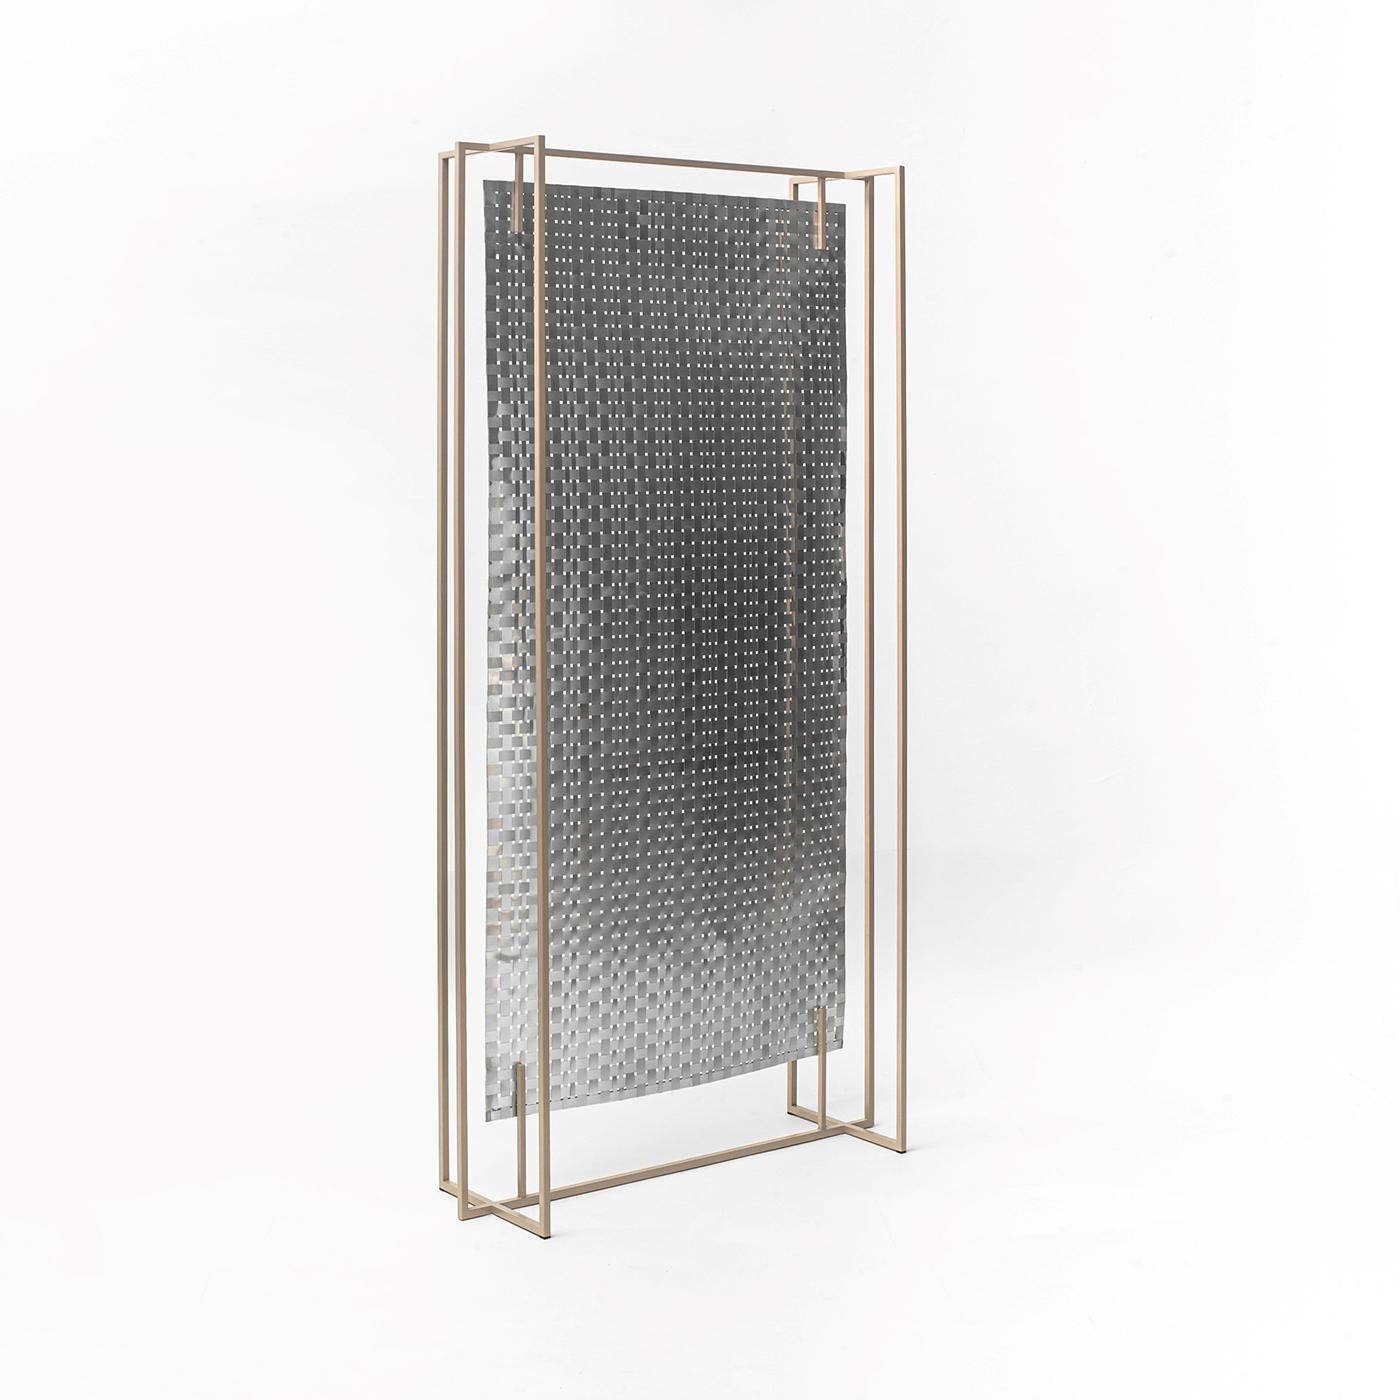 This dual-purpose floor panel can be placed in the middle of a space as a room divider, as well as being placed against the wall as a decorative backdrop. Its handwoven canvas includes aluminum foil, which gives one side a lustrous, reflective